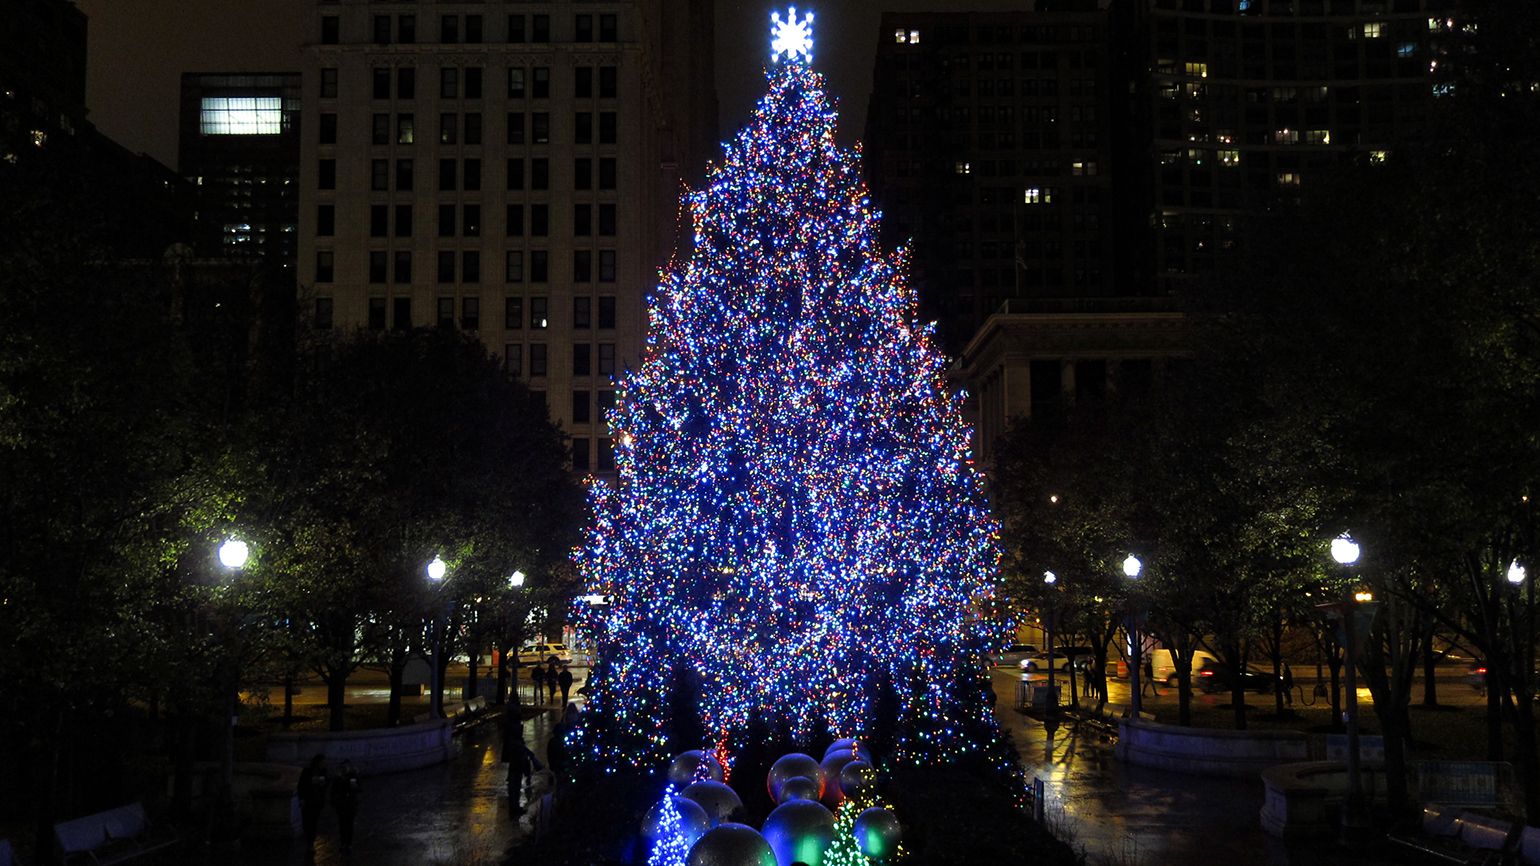 The Windy City's had an official city tree since 1913. For more than a half-century, it was installed in Grant Park, then it spent nearly five decades in Daley (formerly Civic Center) Plaza, but since 2015, the tree has called Millennium Park home.